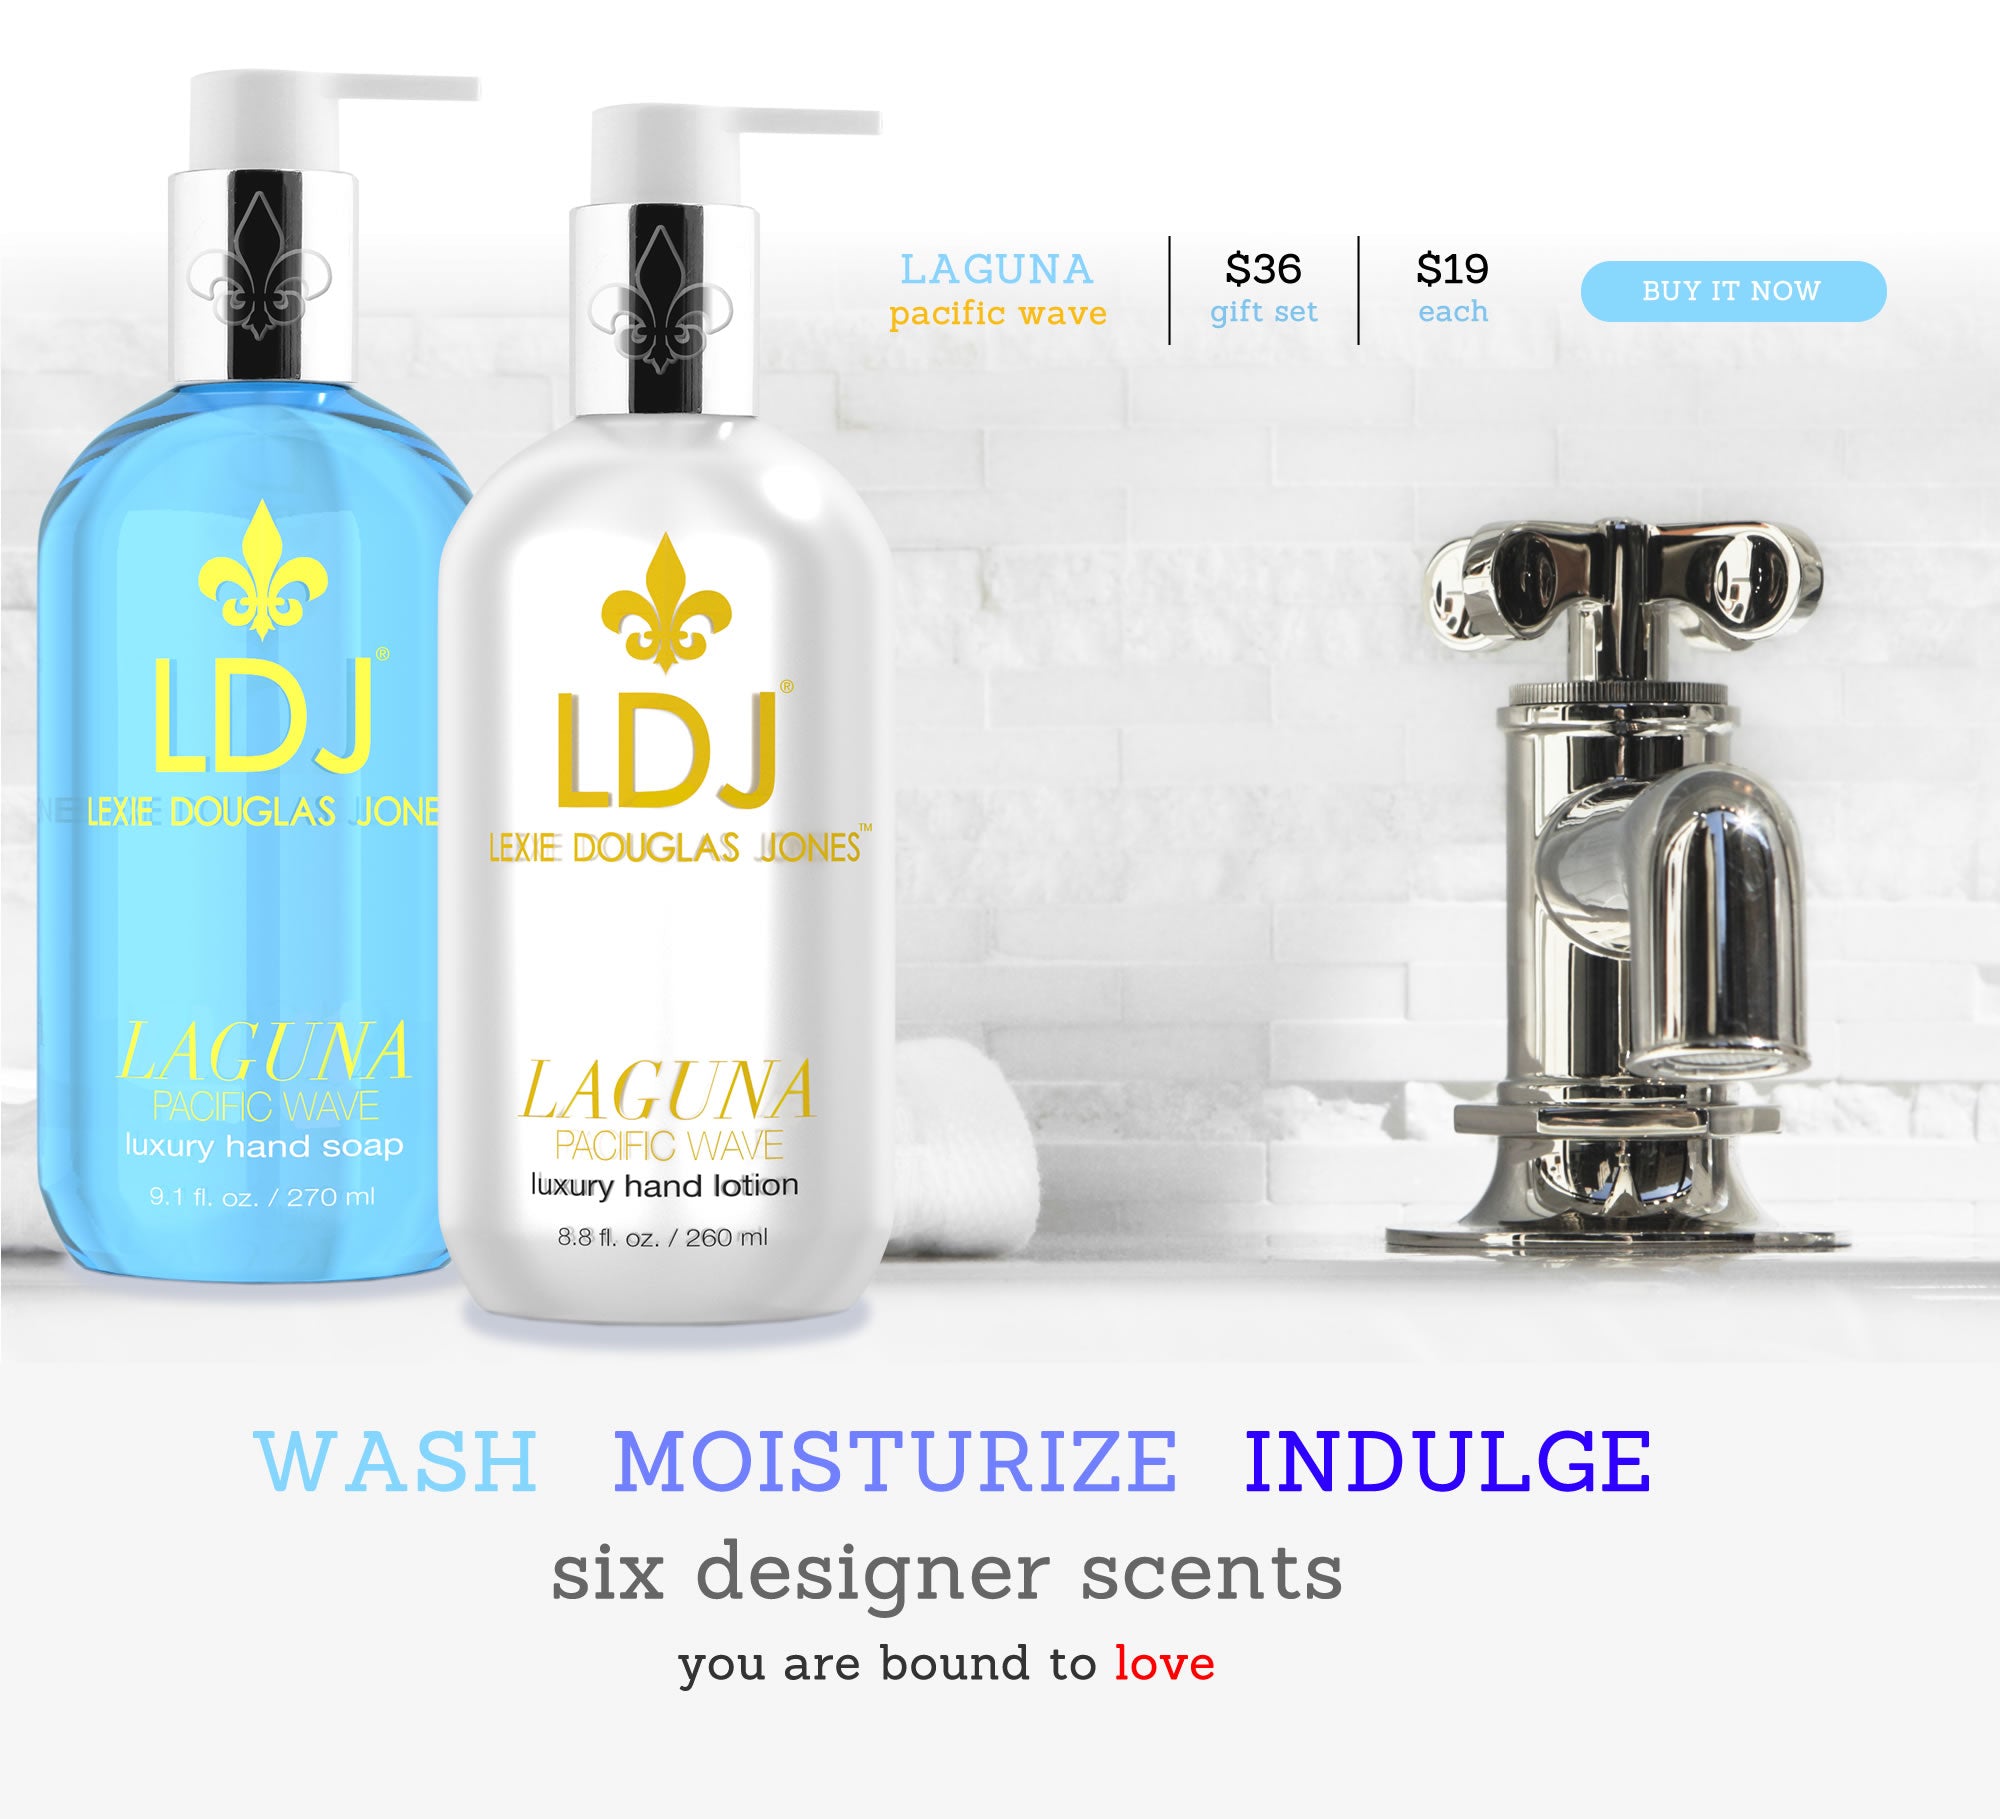 Wash Moisturize Indulge - Six Designer Scents you are bound to love